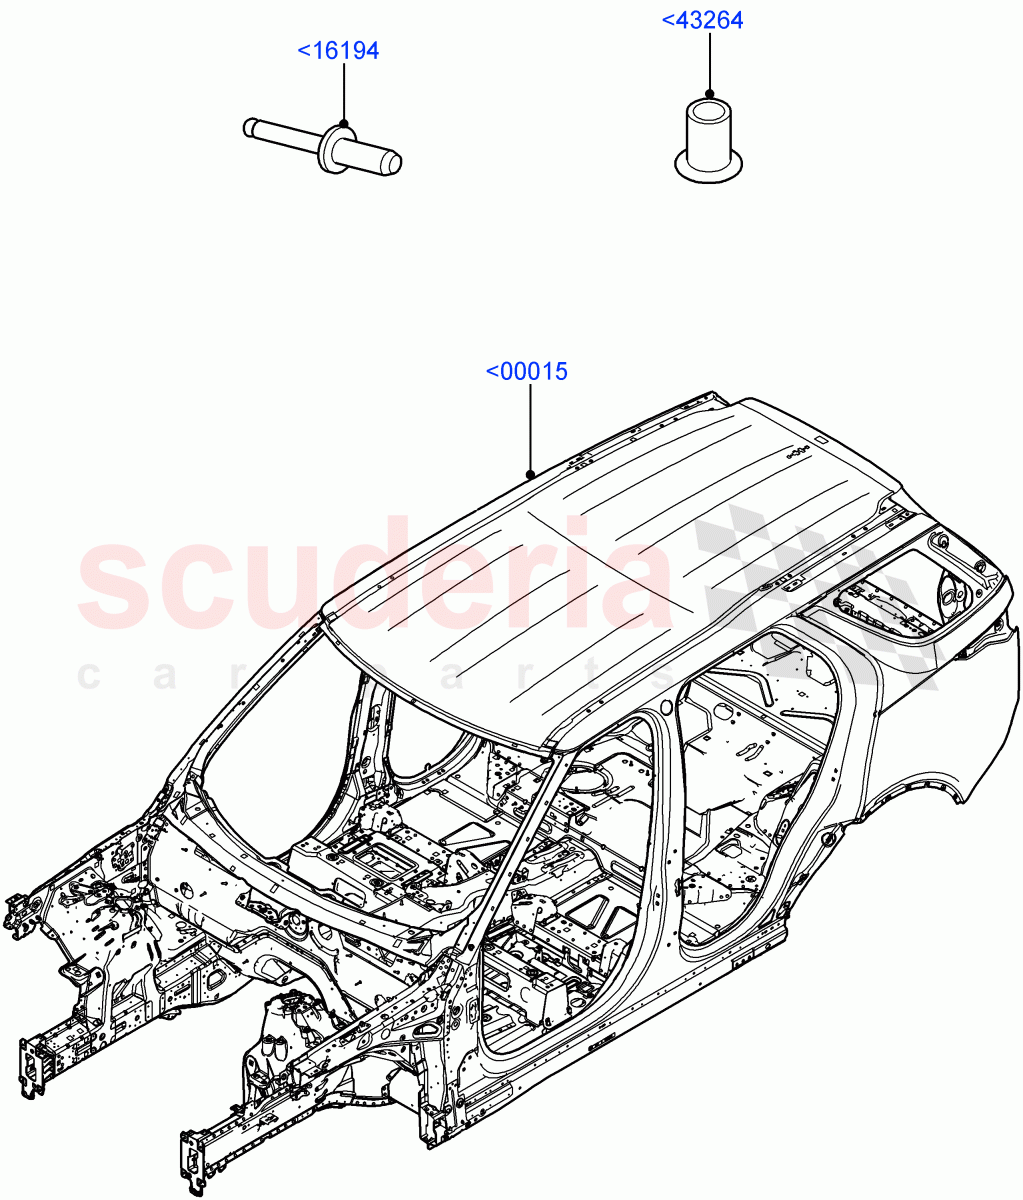 Bodyshell(Nitra Plant Build)((V)FROMK2000001) of Land Rover Land Rover Discovery 5 (2017+) [3.0 I6 Turbo Diesel AJ20D6]